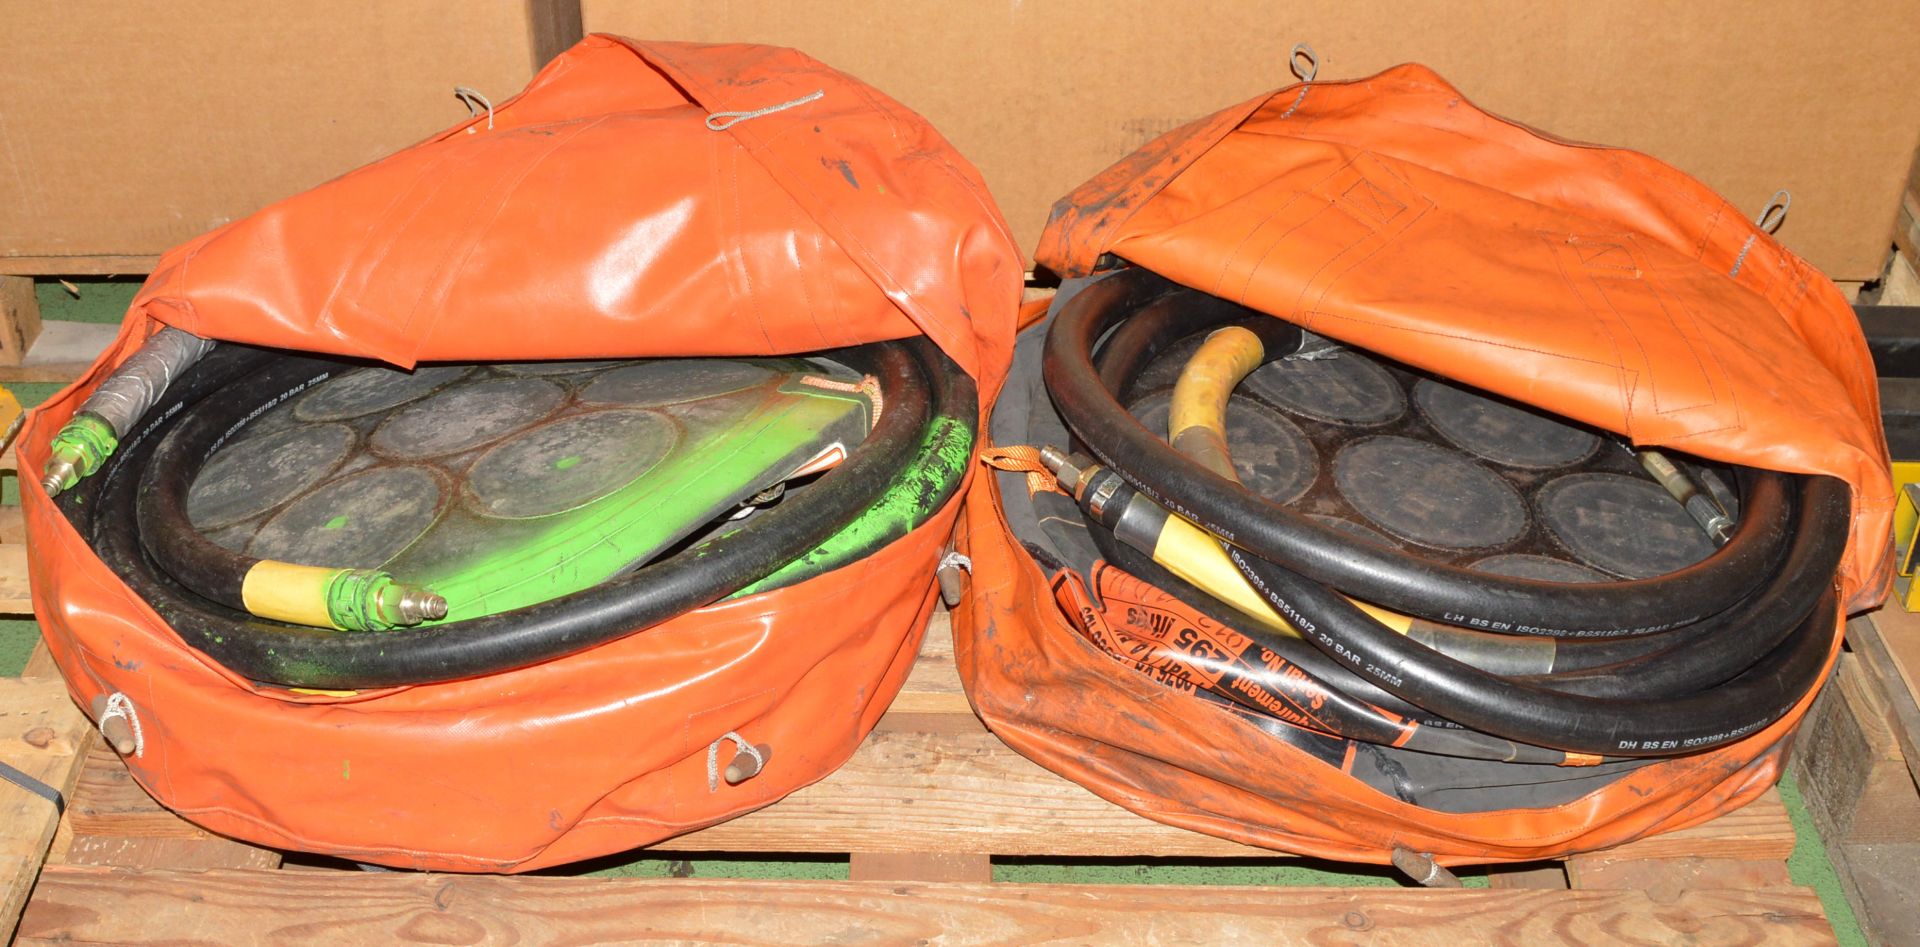 2x MFC Survival Airbags & Hoses. - Image 2 of 2